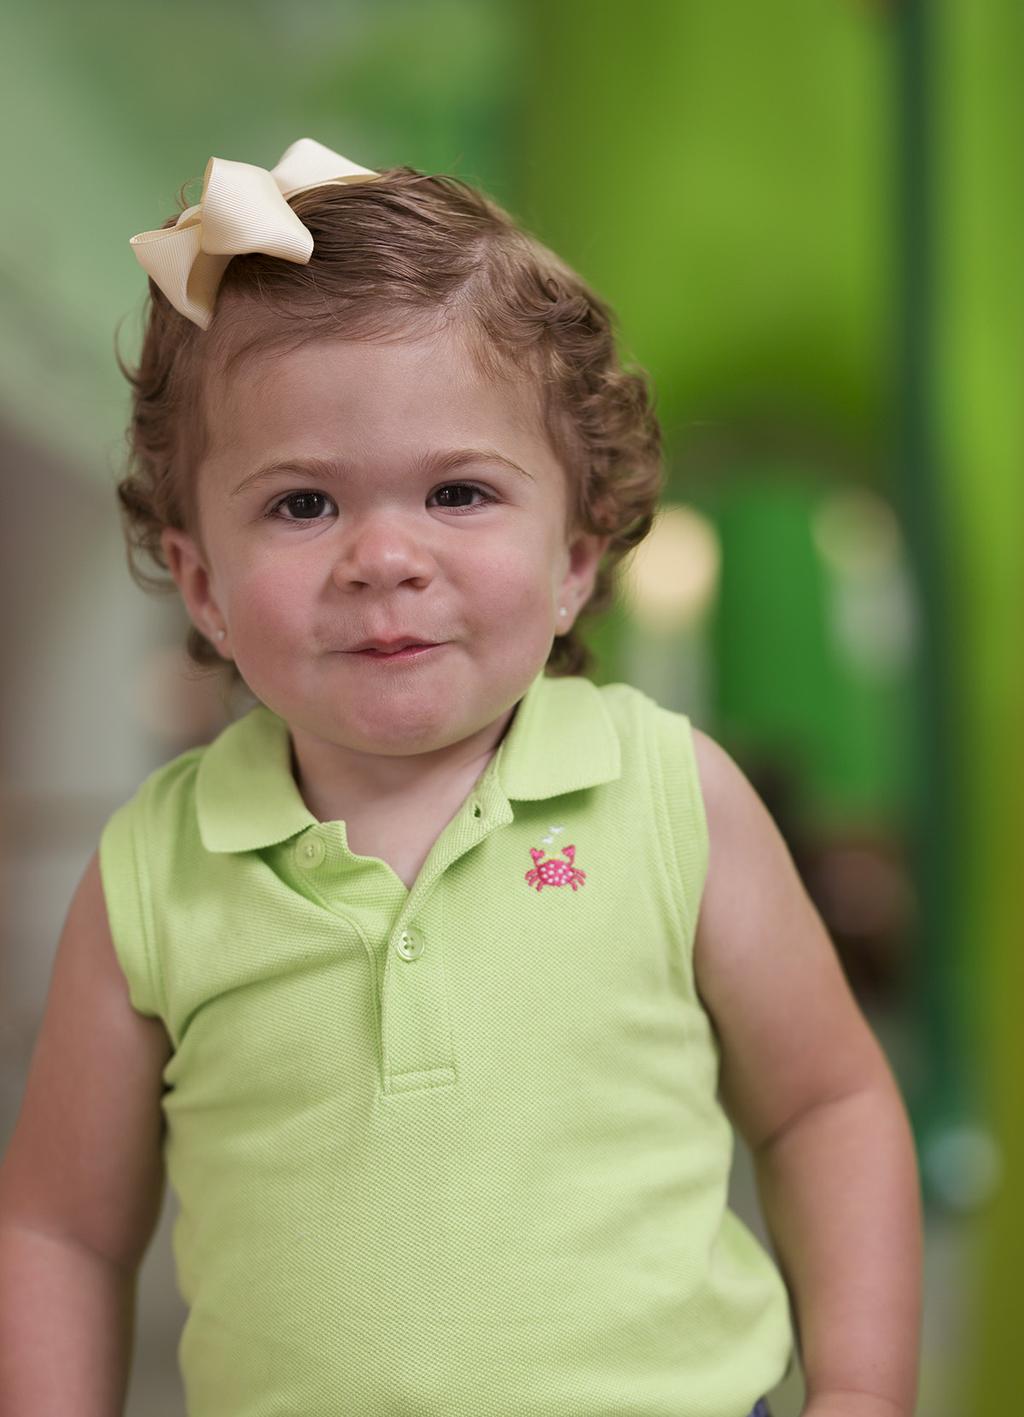 Finally, they came to Nationwide Children s Hospital and within that first appointment doctors knew Kinzley, just nine months old, had Hurler s Syndrome.